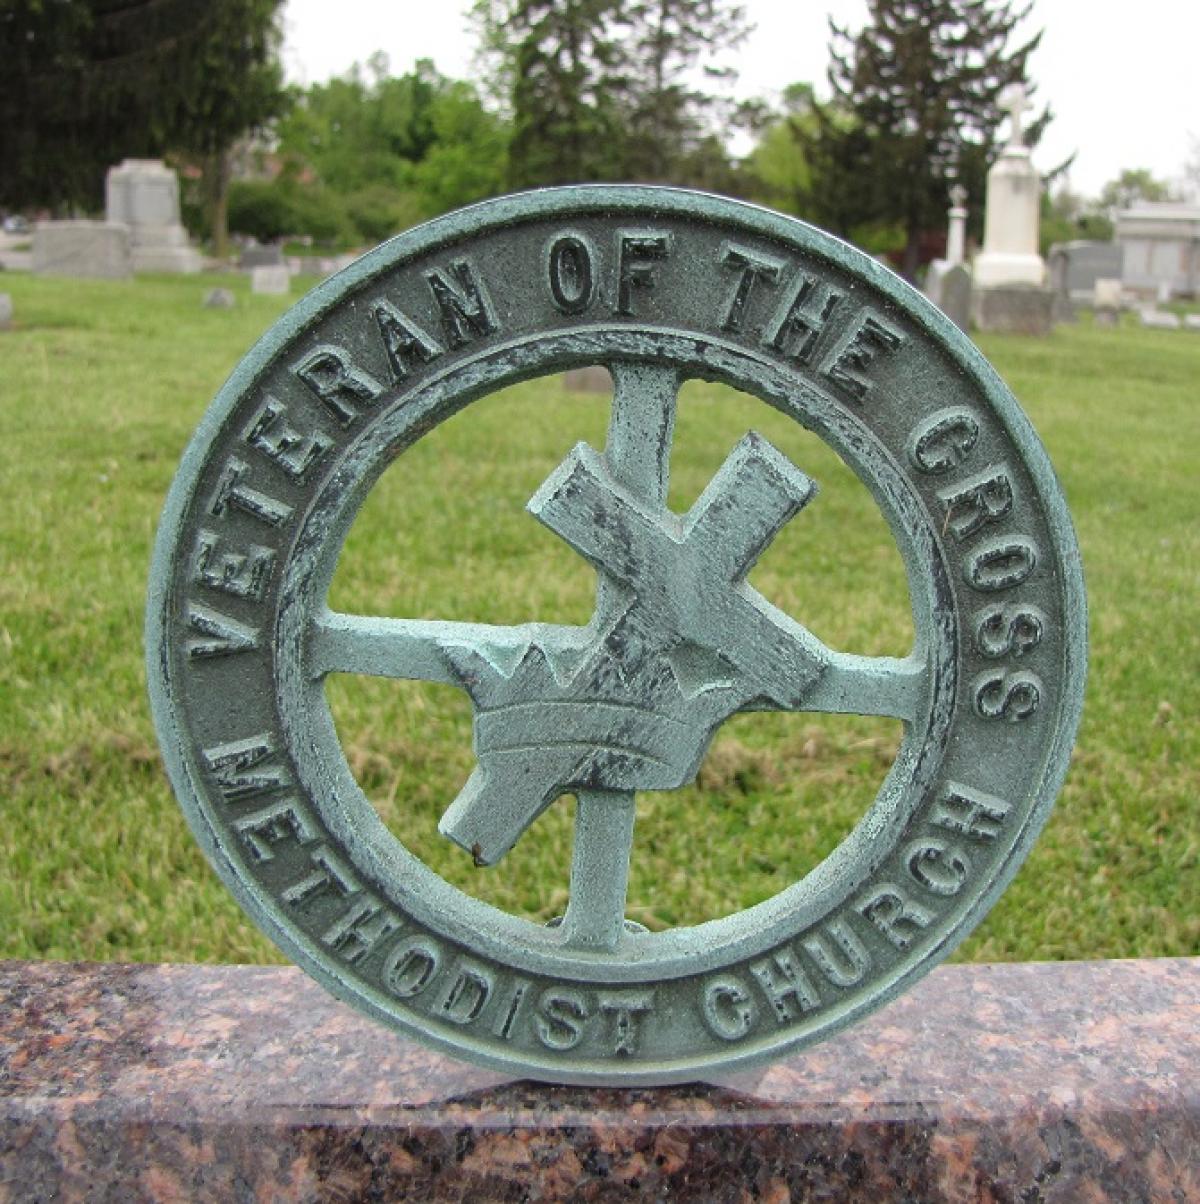 OK, Grove, Headstone Symbols and Meanings, Veteran of the Cross